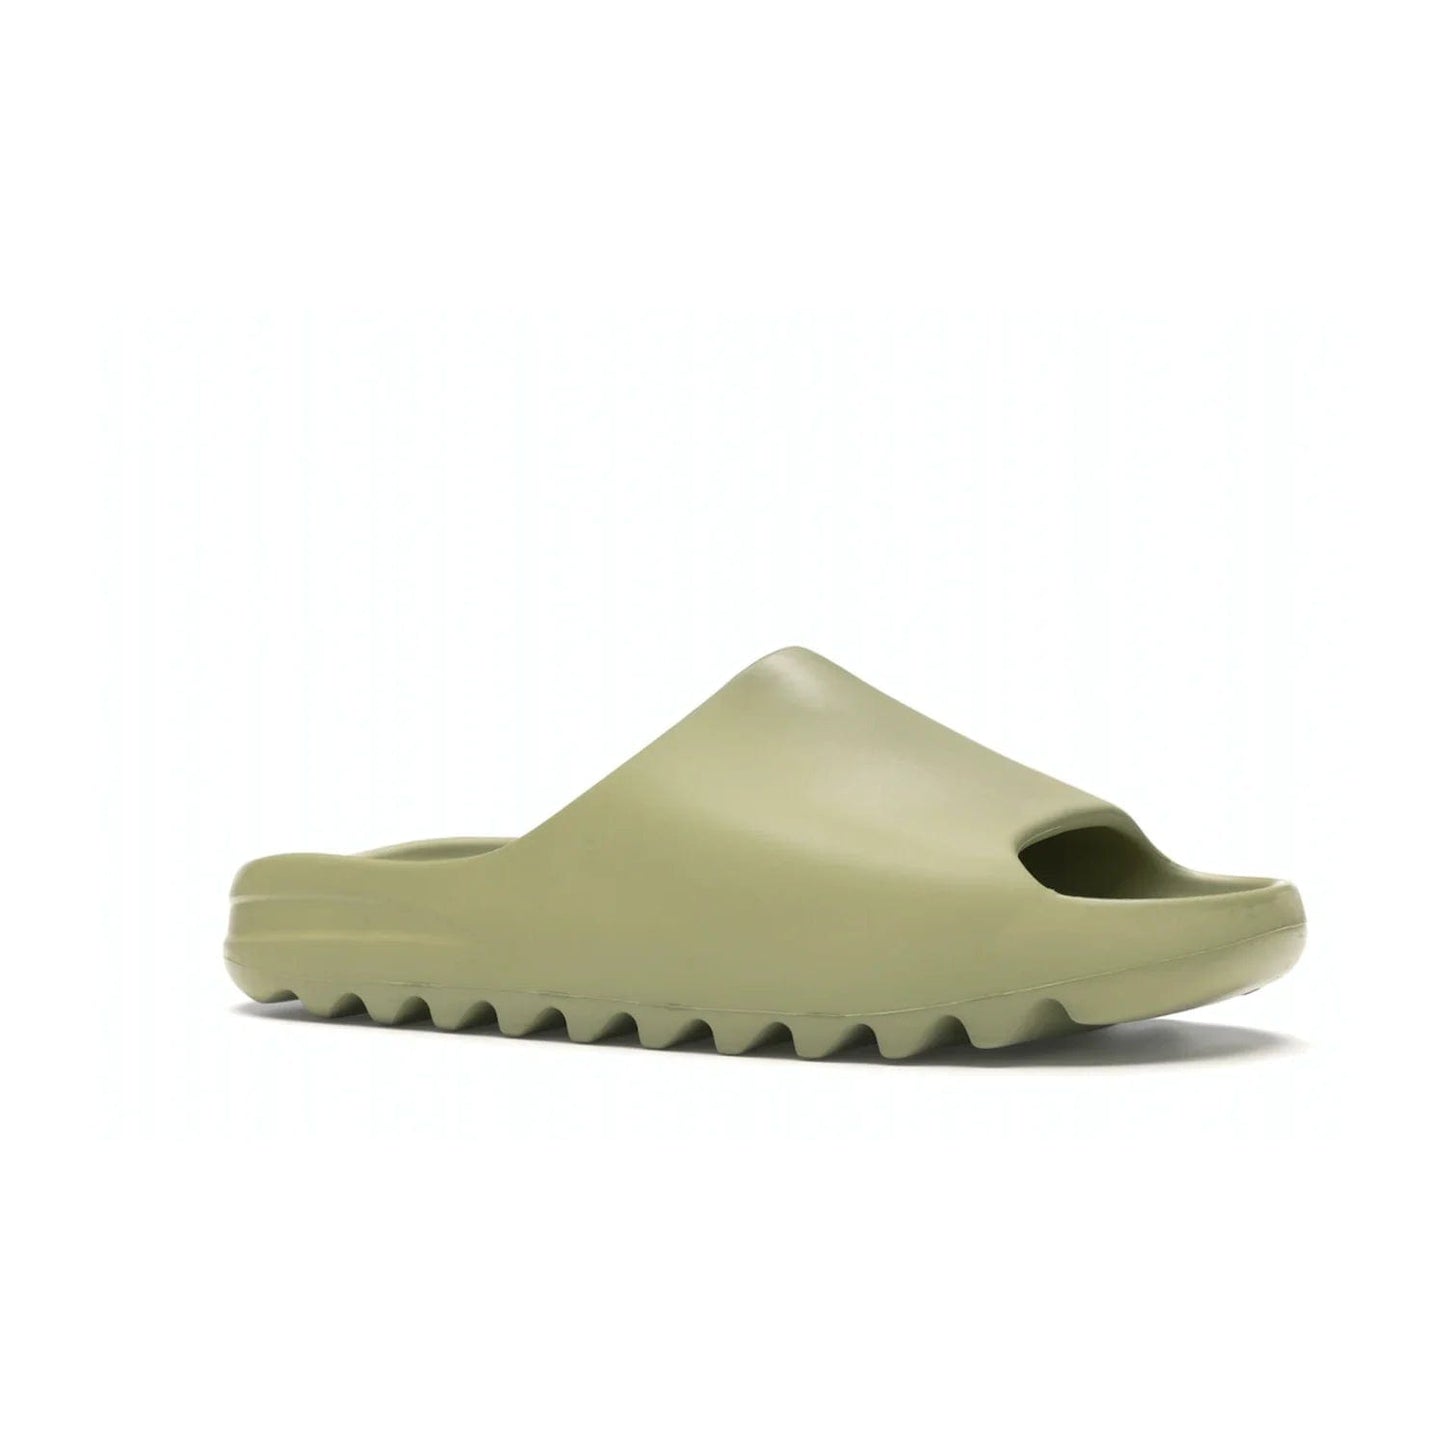 adidas Yeezy Slide Resin (2019/2021) - Image 4 - Only at www.BallersClubKickz.com - Step into fashion and function with the adidas Yeezy Slide Resin. Featuring a lightweight Resin EVA foam construction and an outsole with accentuated grooves for traction and support. The latest release is available in a Resin/Resin/Resin colorway, combining modern aesthetics and classic style. Step into style with the adidas Yeezy Slide Resin and be the trend-setter this season.